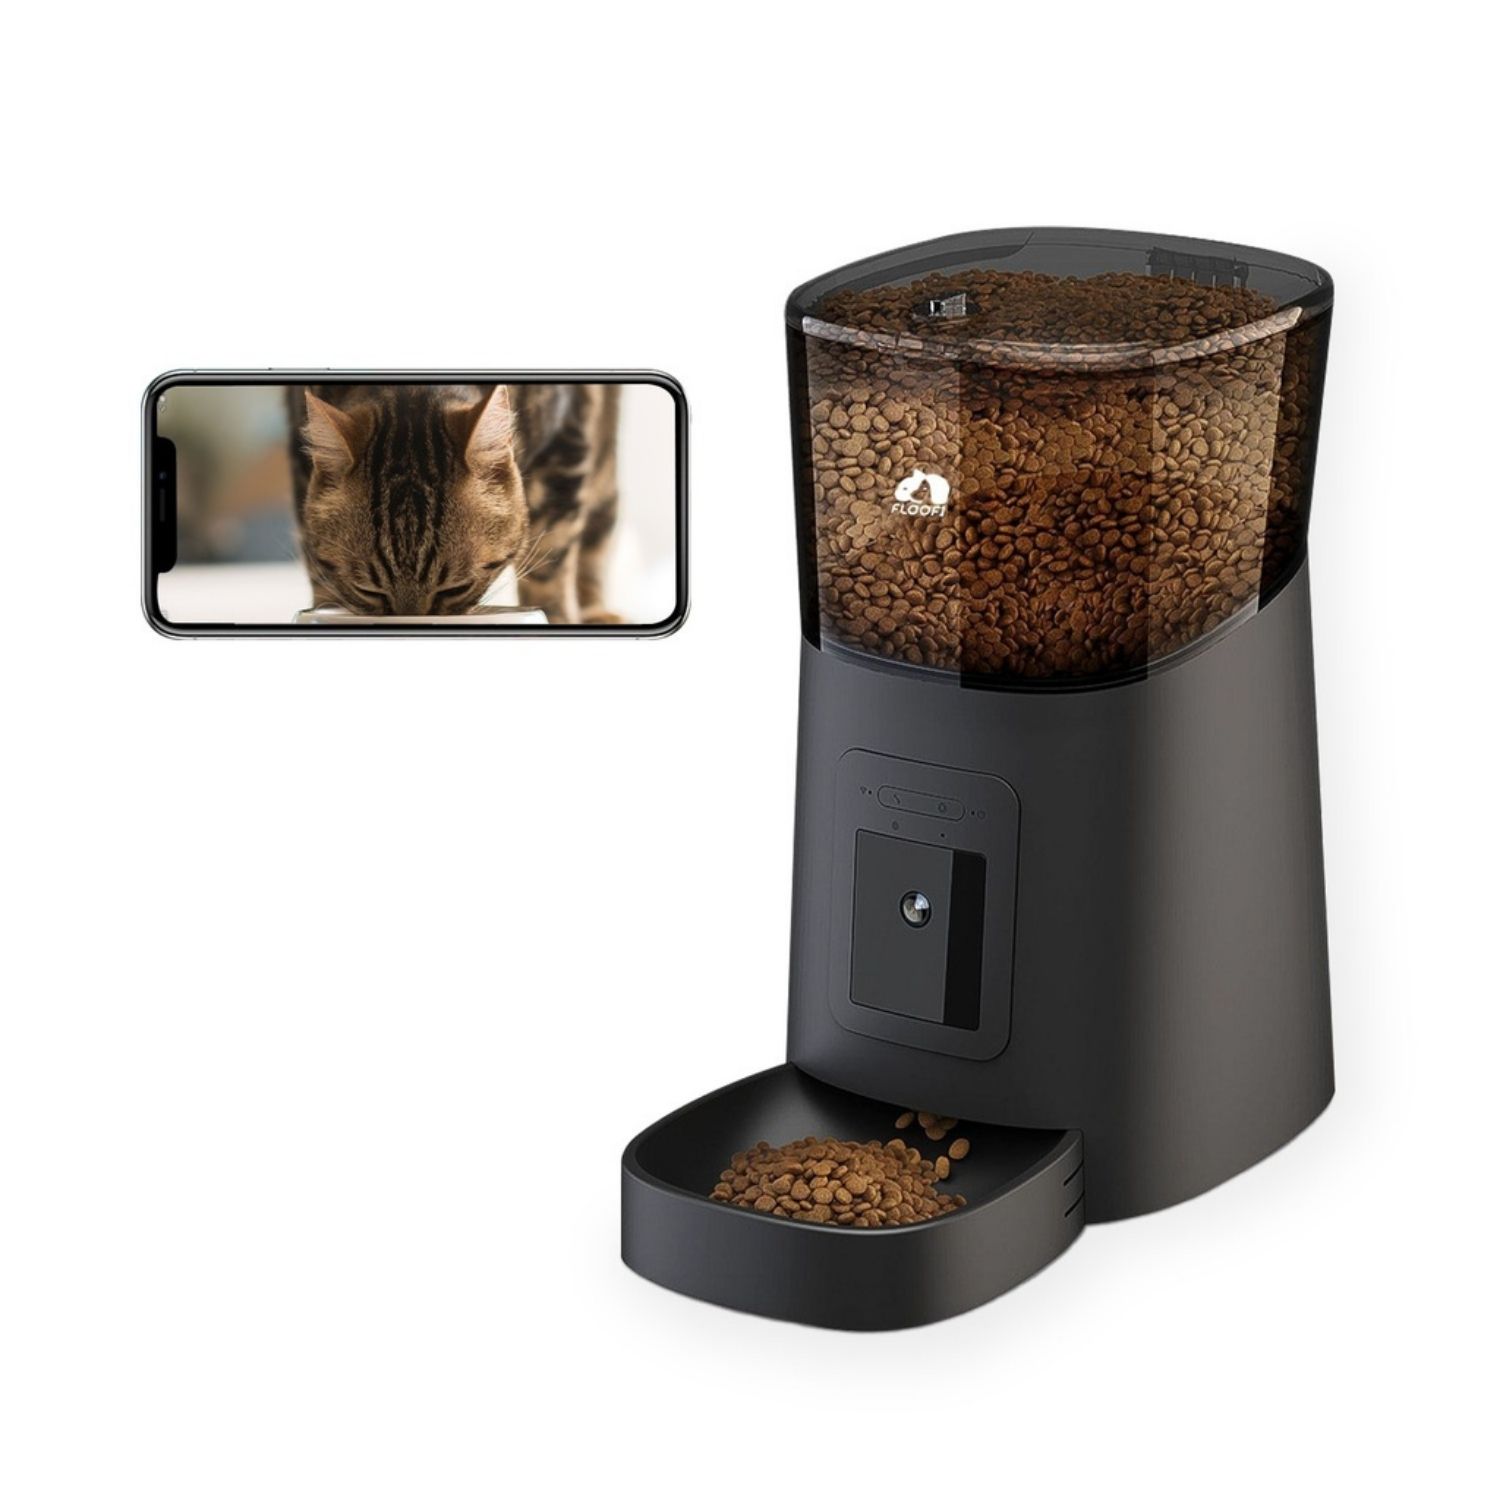 Floofi Automatic Pet Feeder With 1080p Camera & App Control with Two-Way Voice 6L - Black